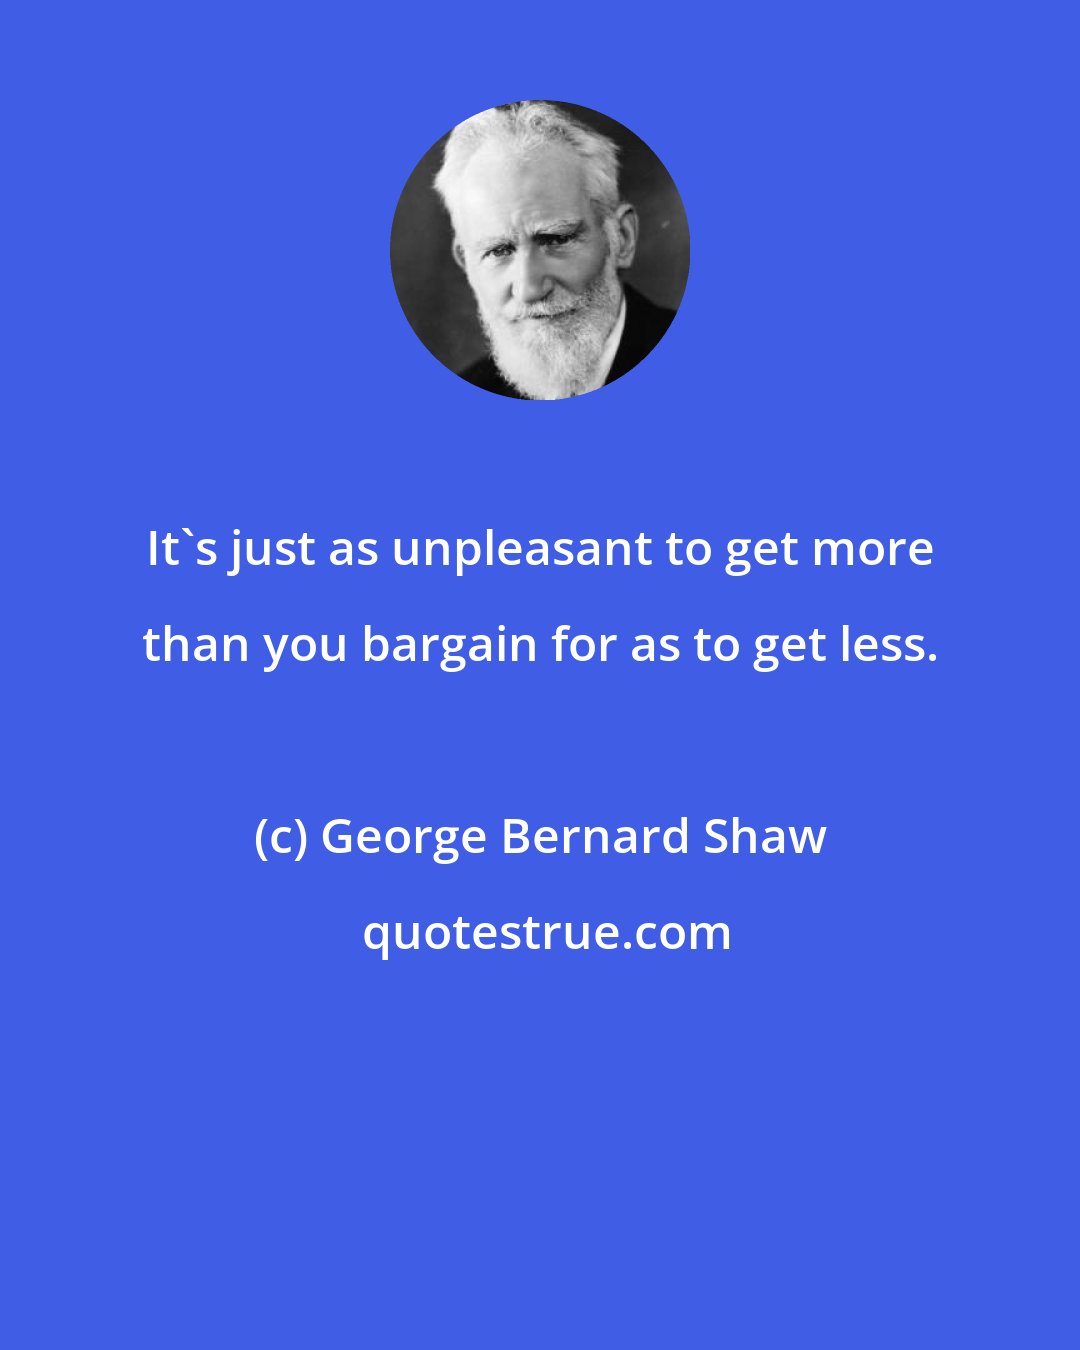 George Bernard Shaw: It's just as unpleasant to get more than you bargain for as to get less.